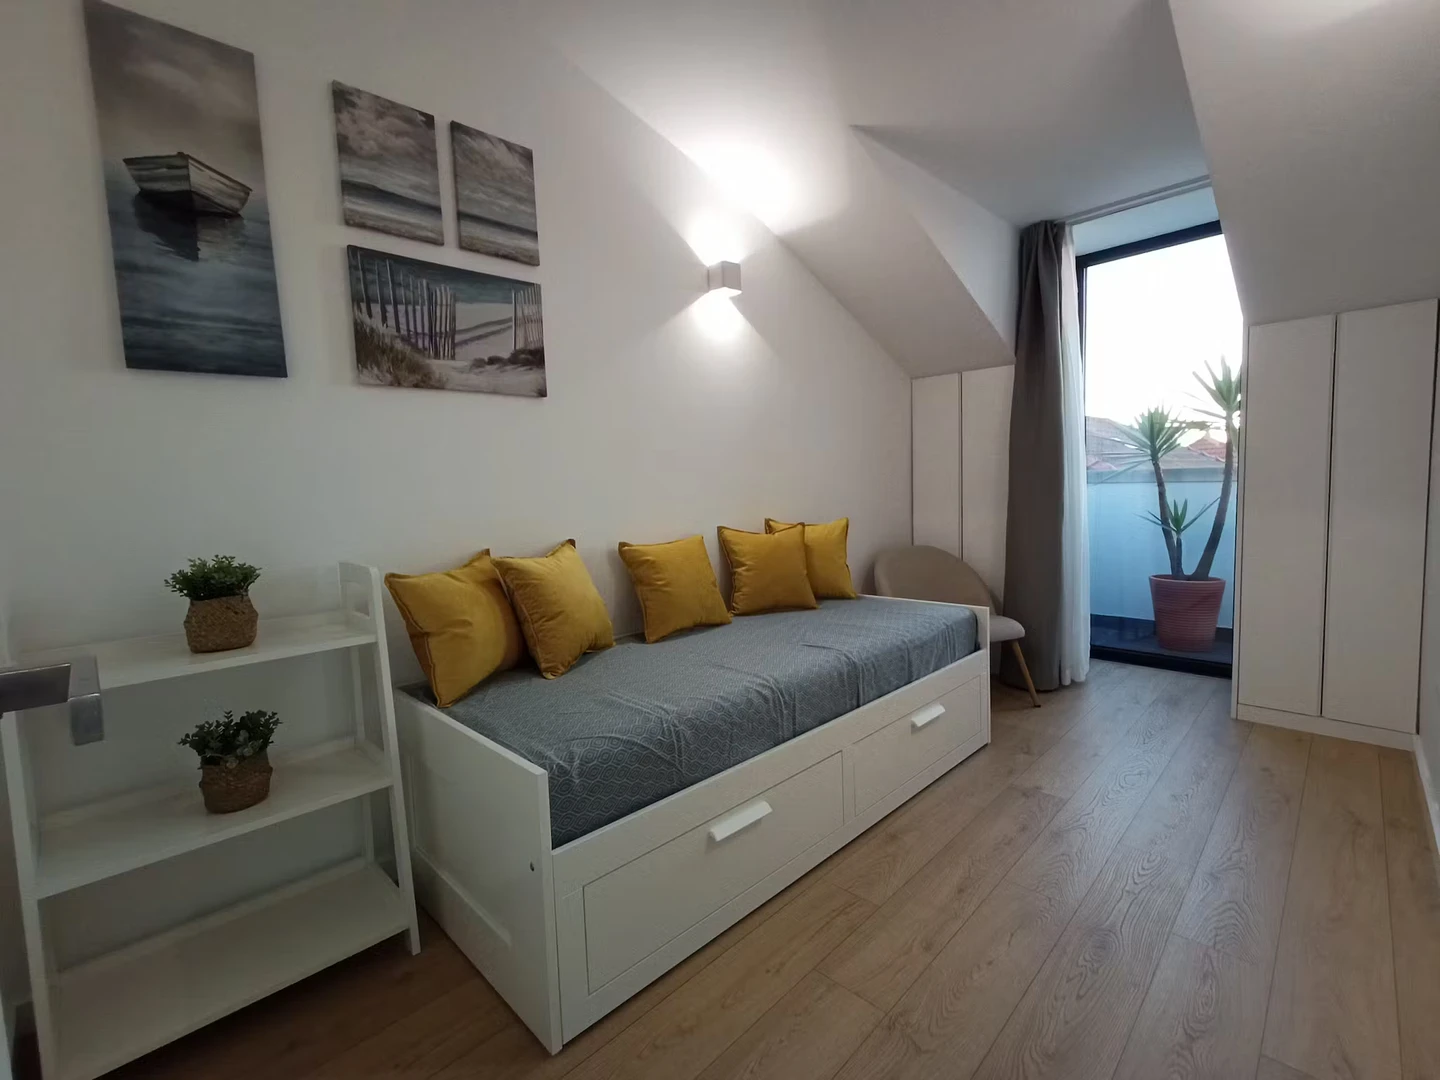 Accommodation in the centre of Aveiro